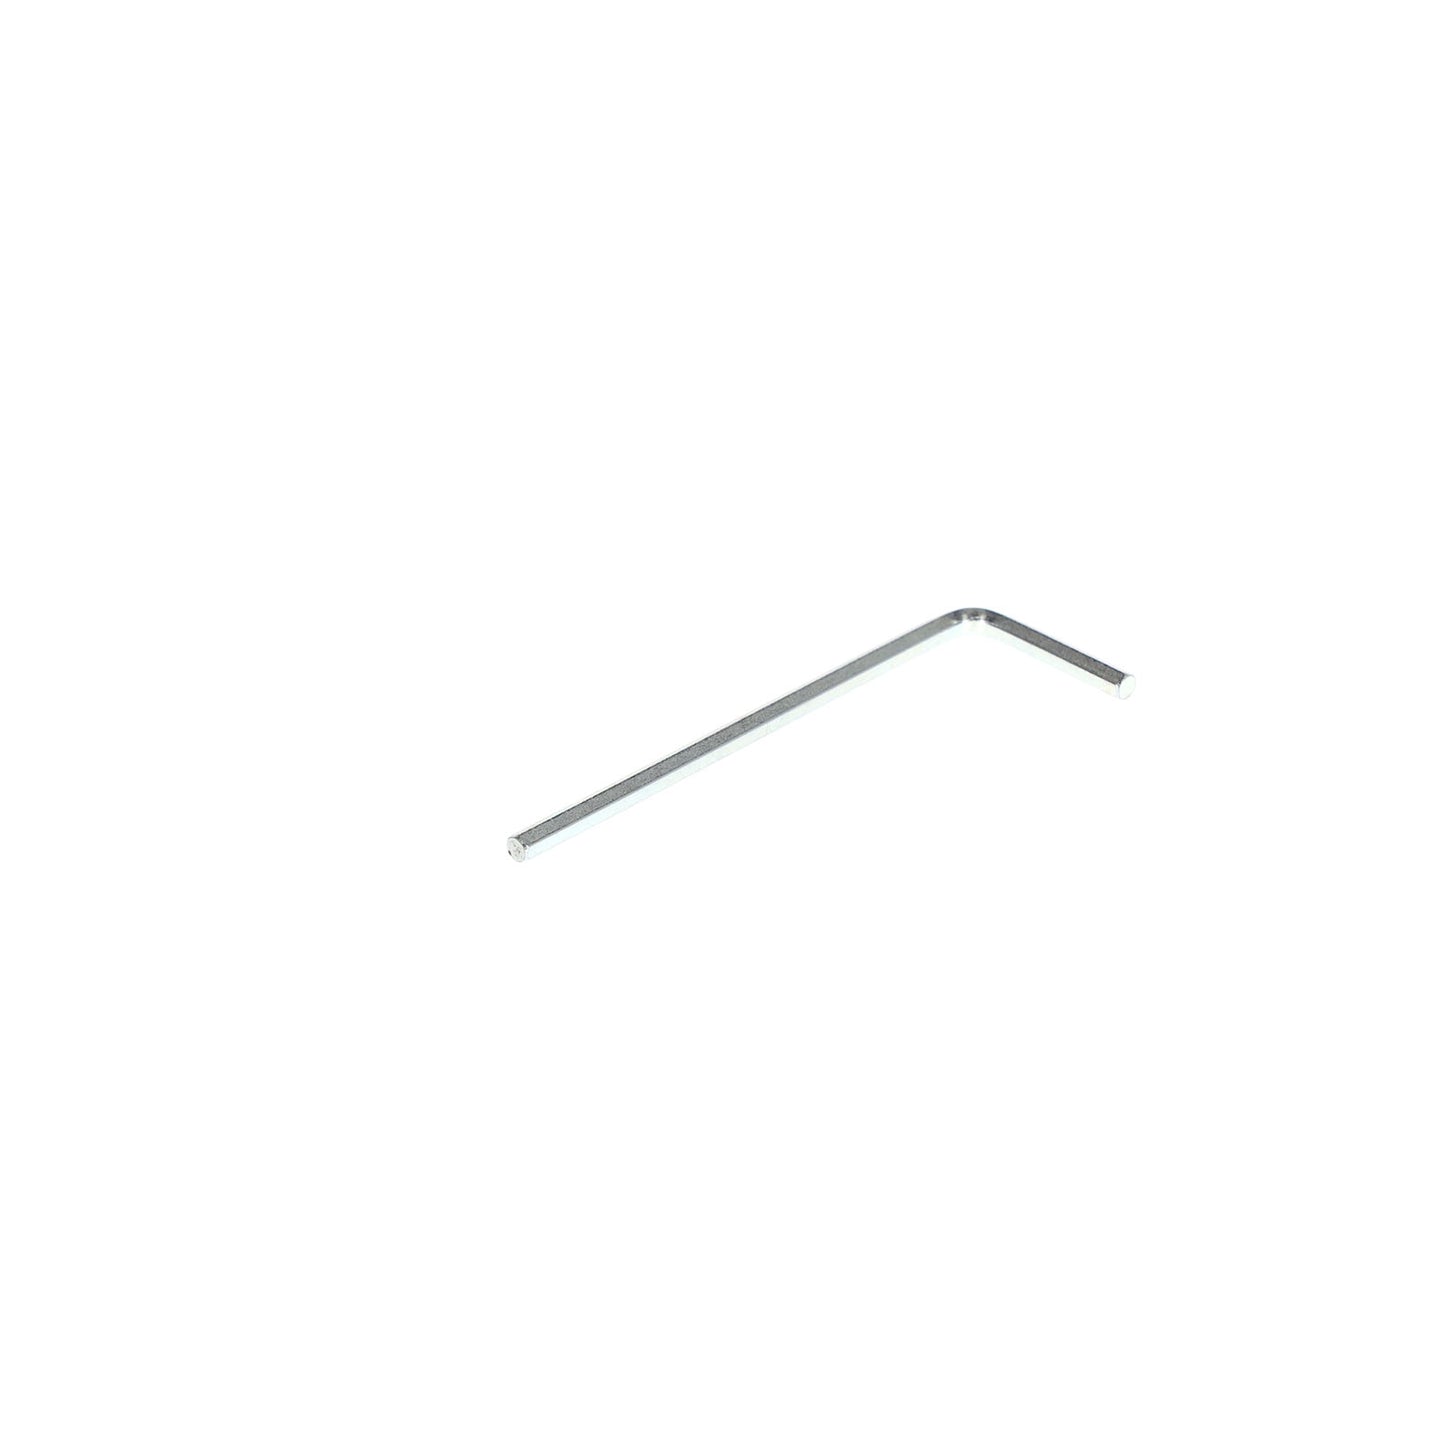 GEDORE 42 2.5 - Angled Allen Key 2.5 mm (6340420)